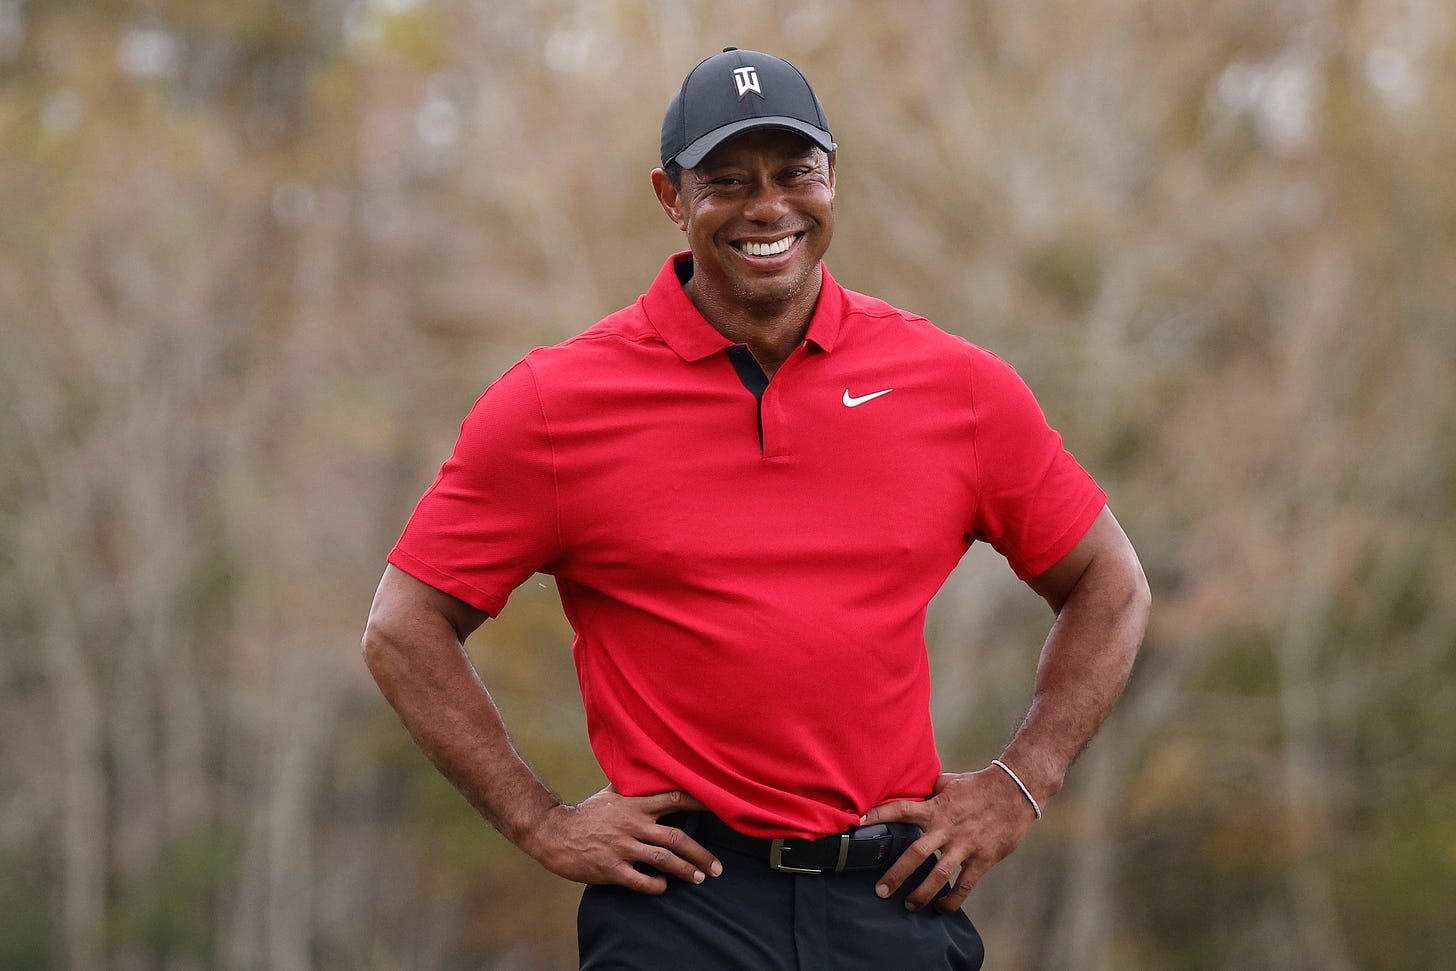 Tiger Woods recently announced that his 27-year association with Nike had ended